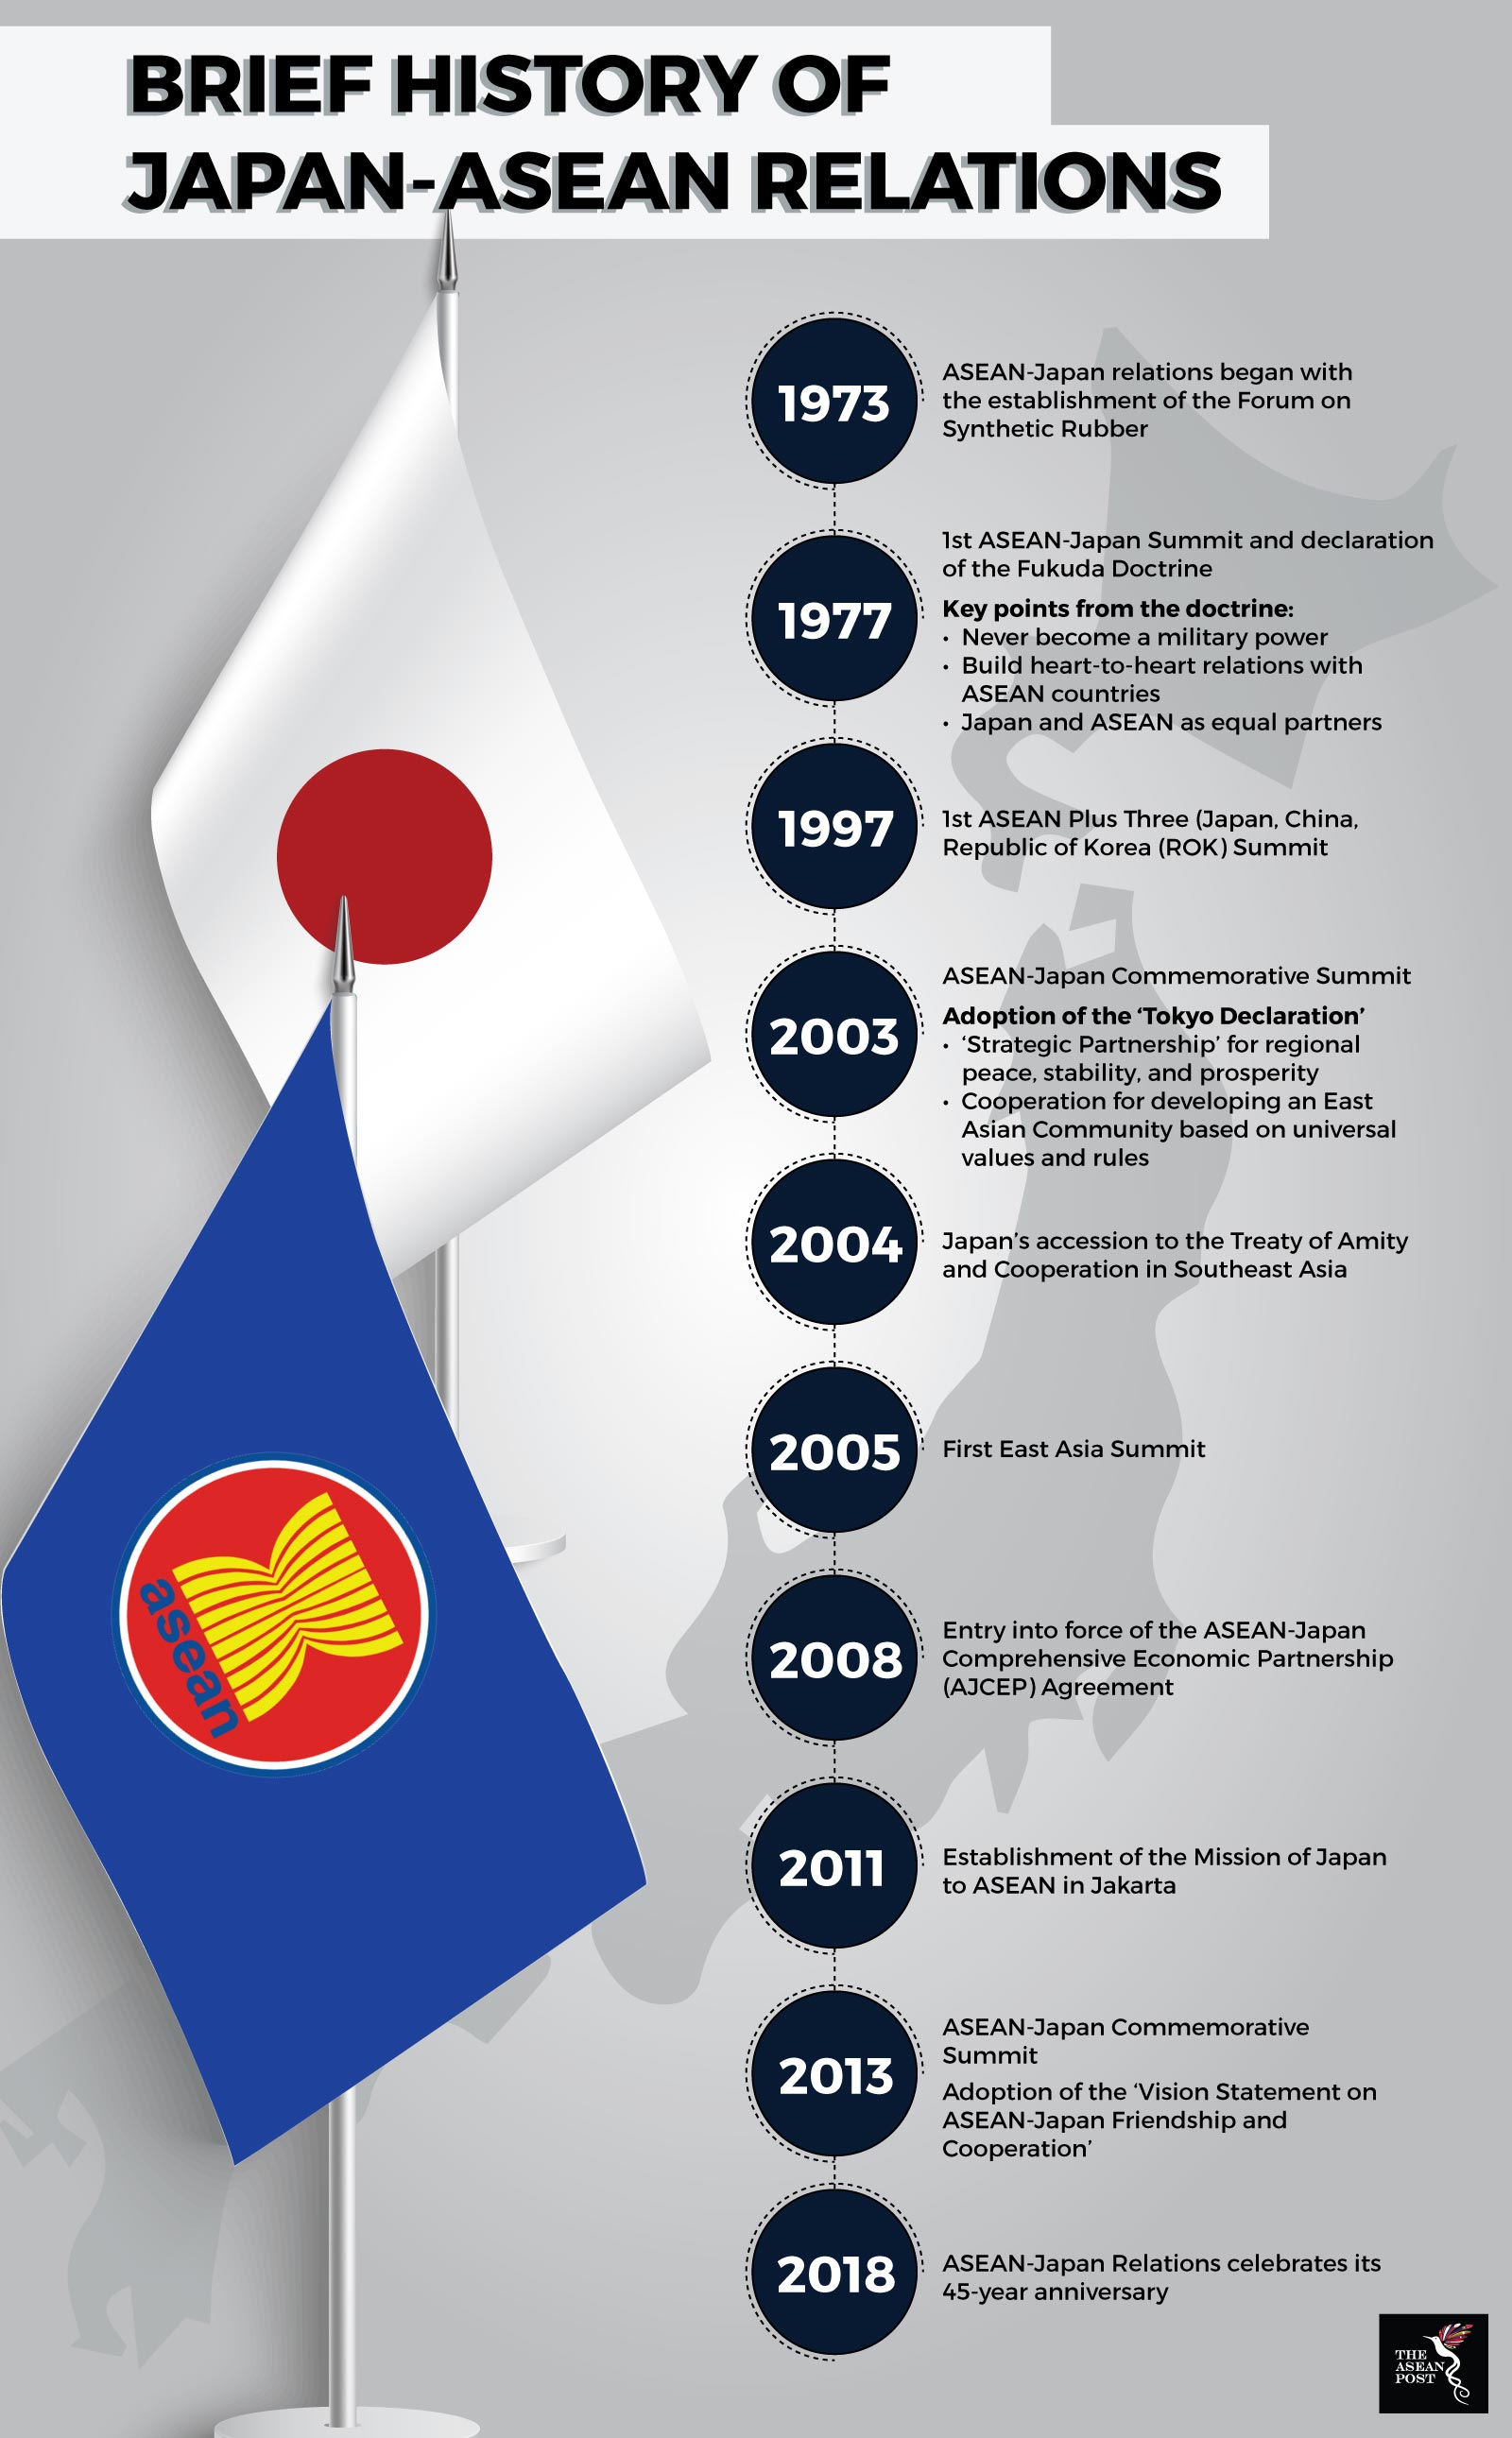 Why is Japan important to ASEAN?